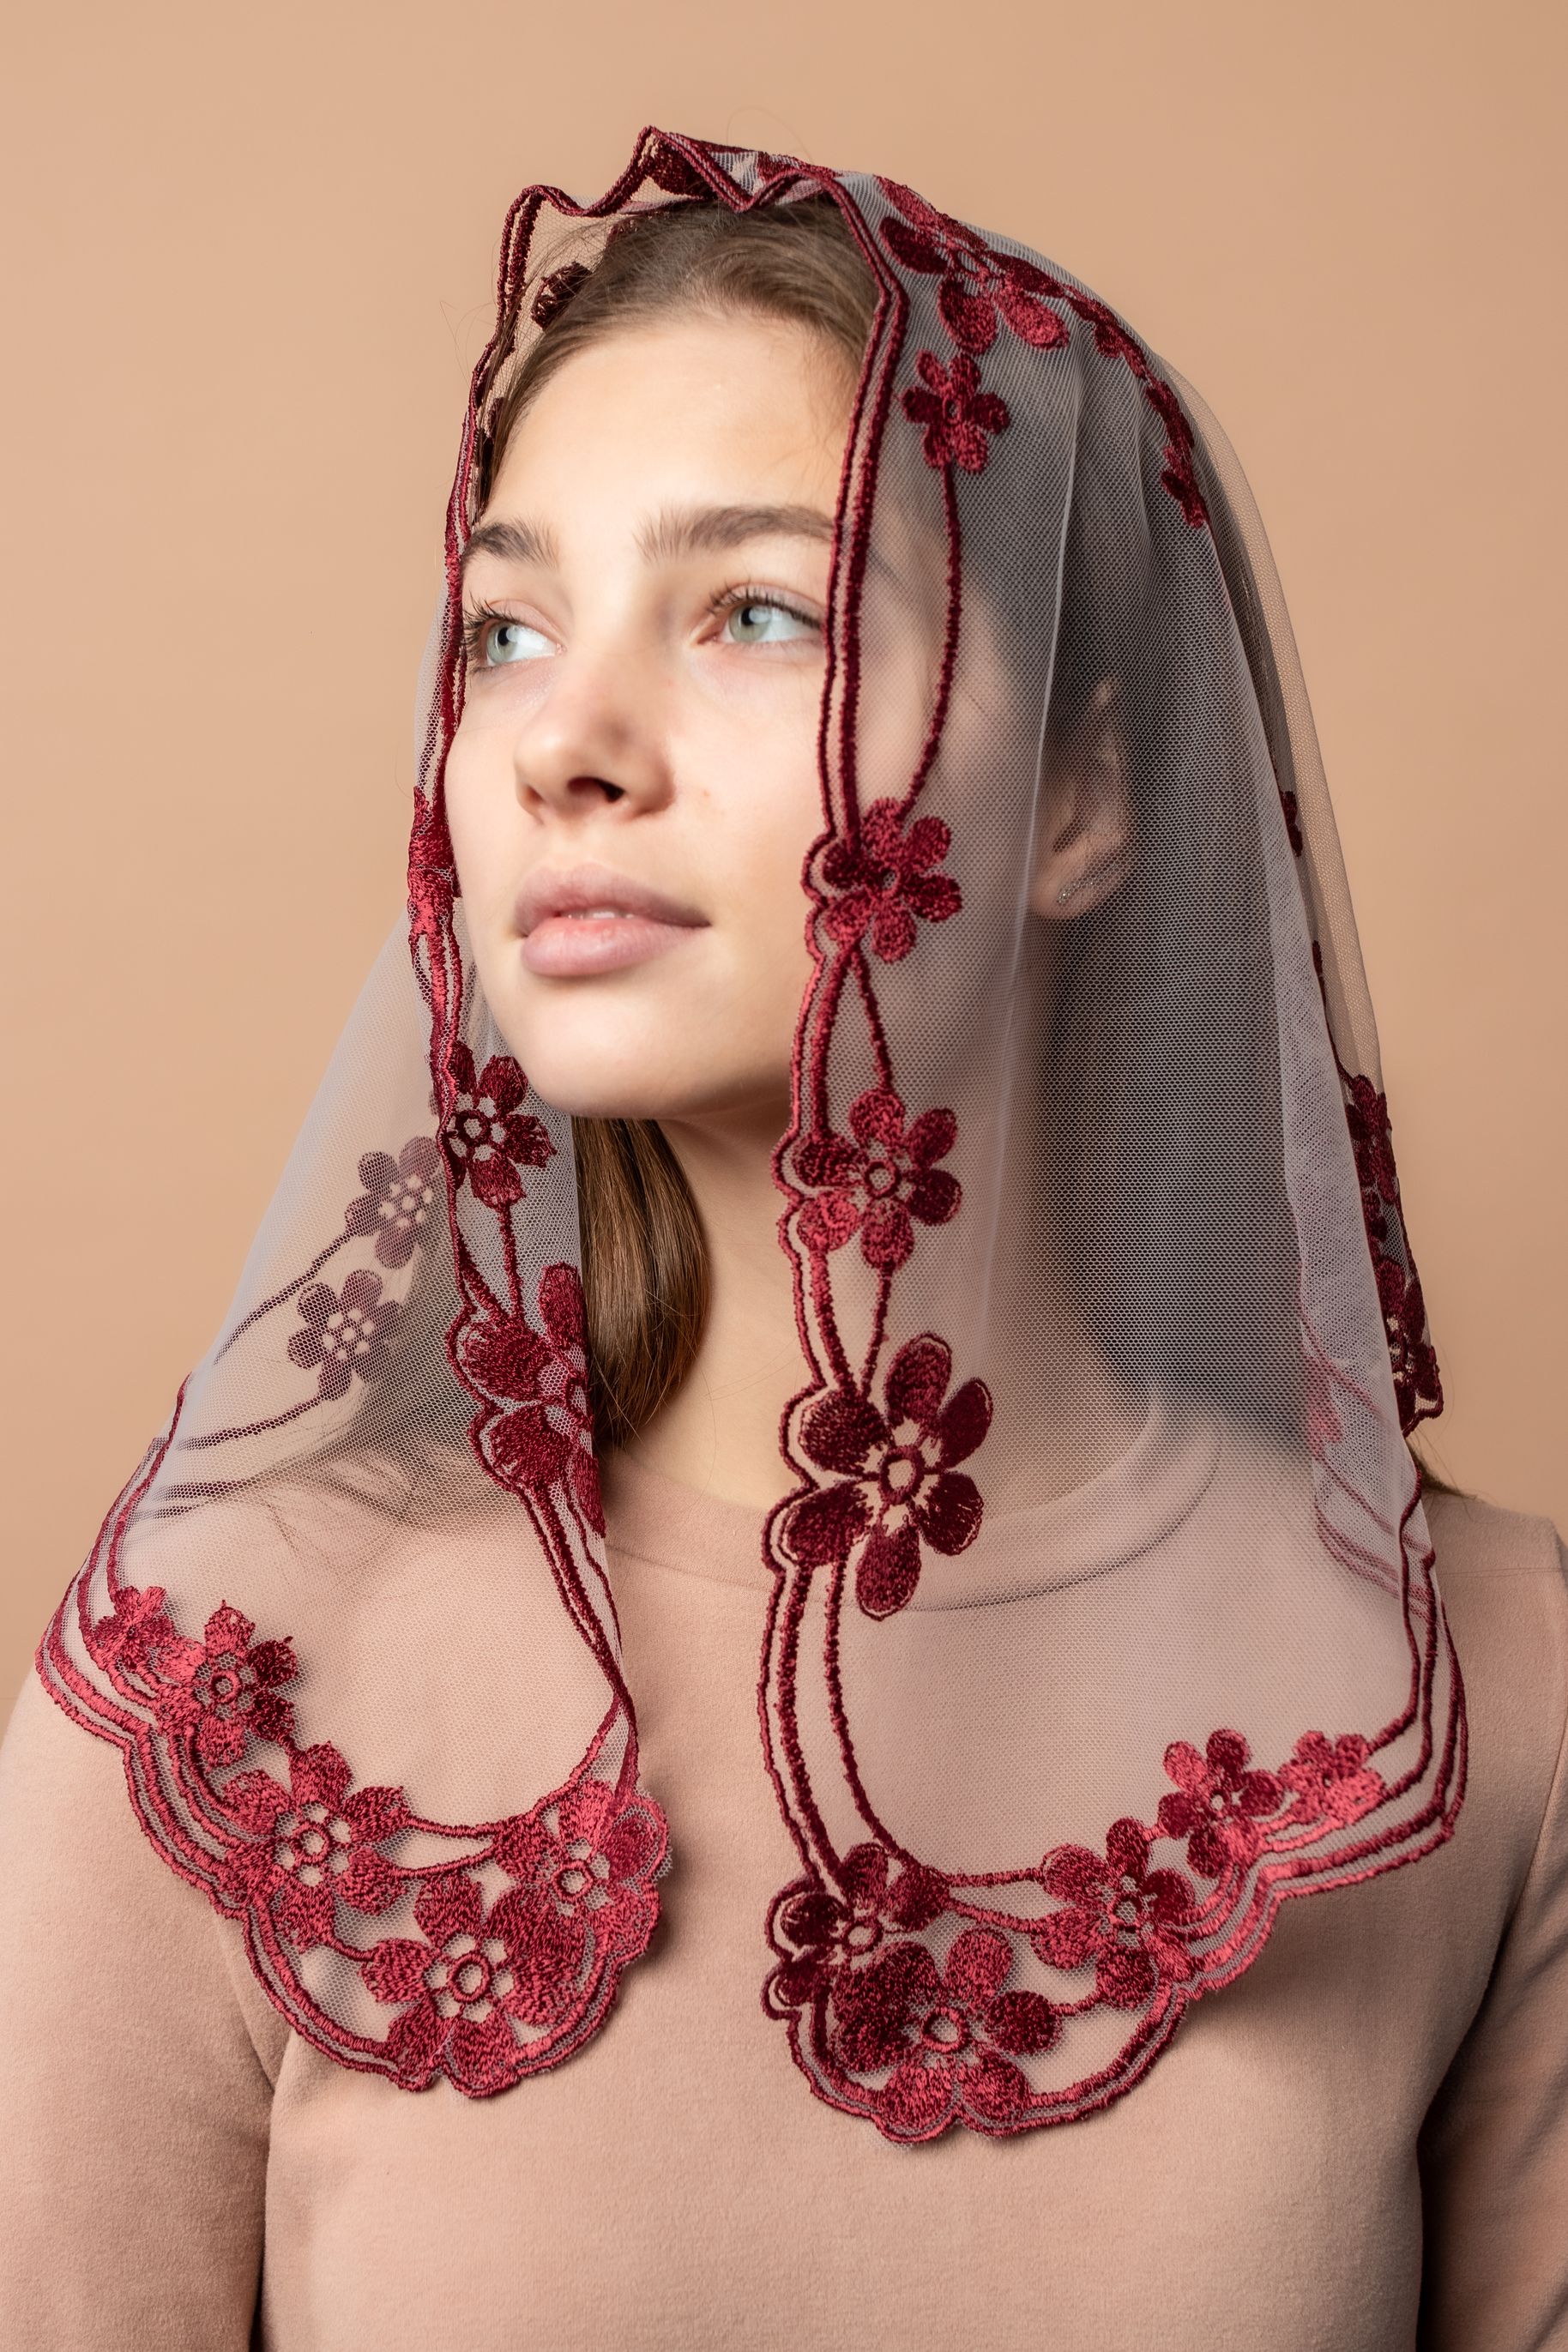 NEW COLOR Bestseller! Dark red lace veil - MariaVeils